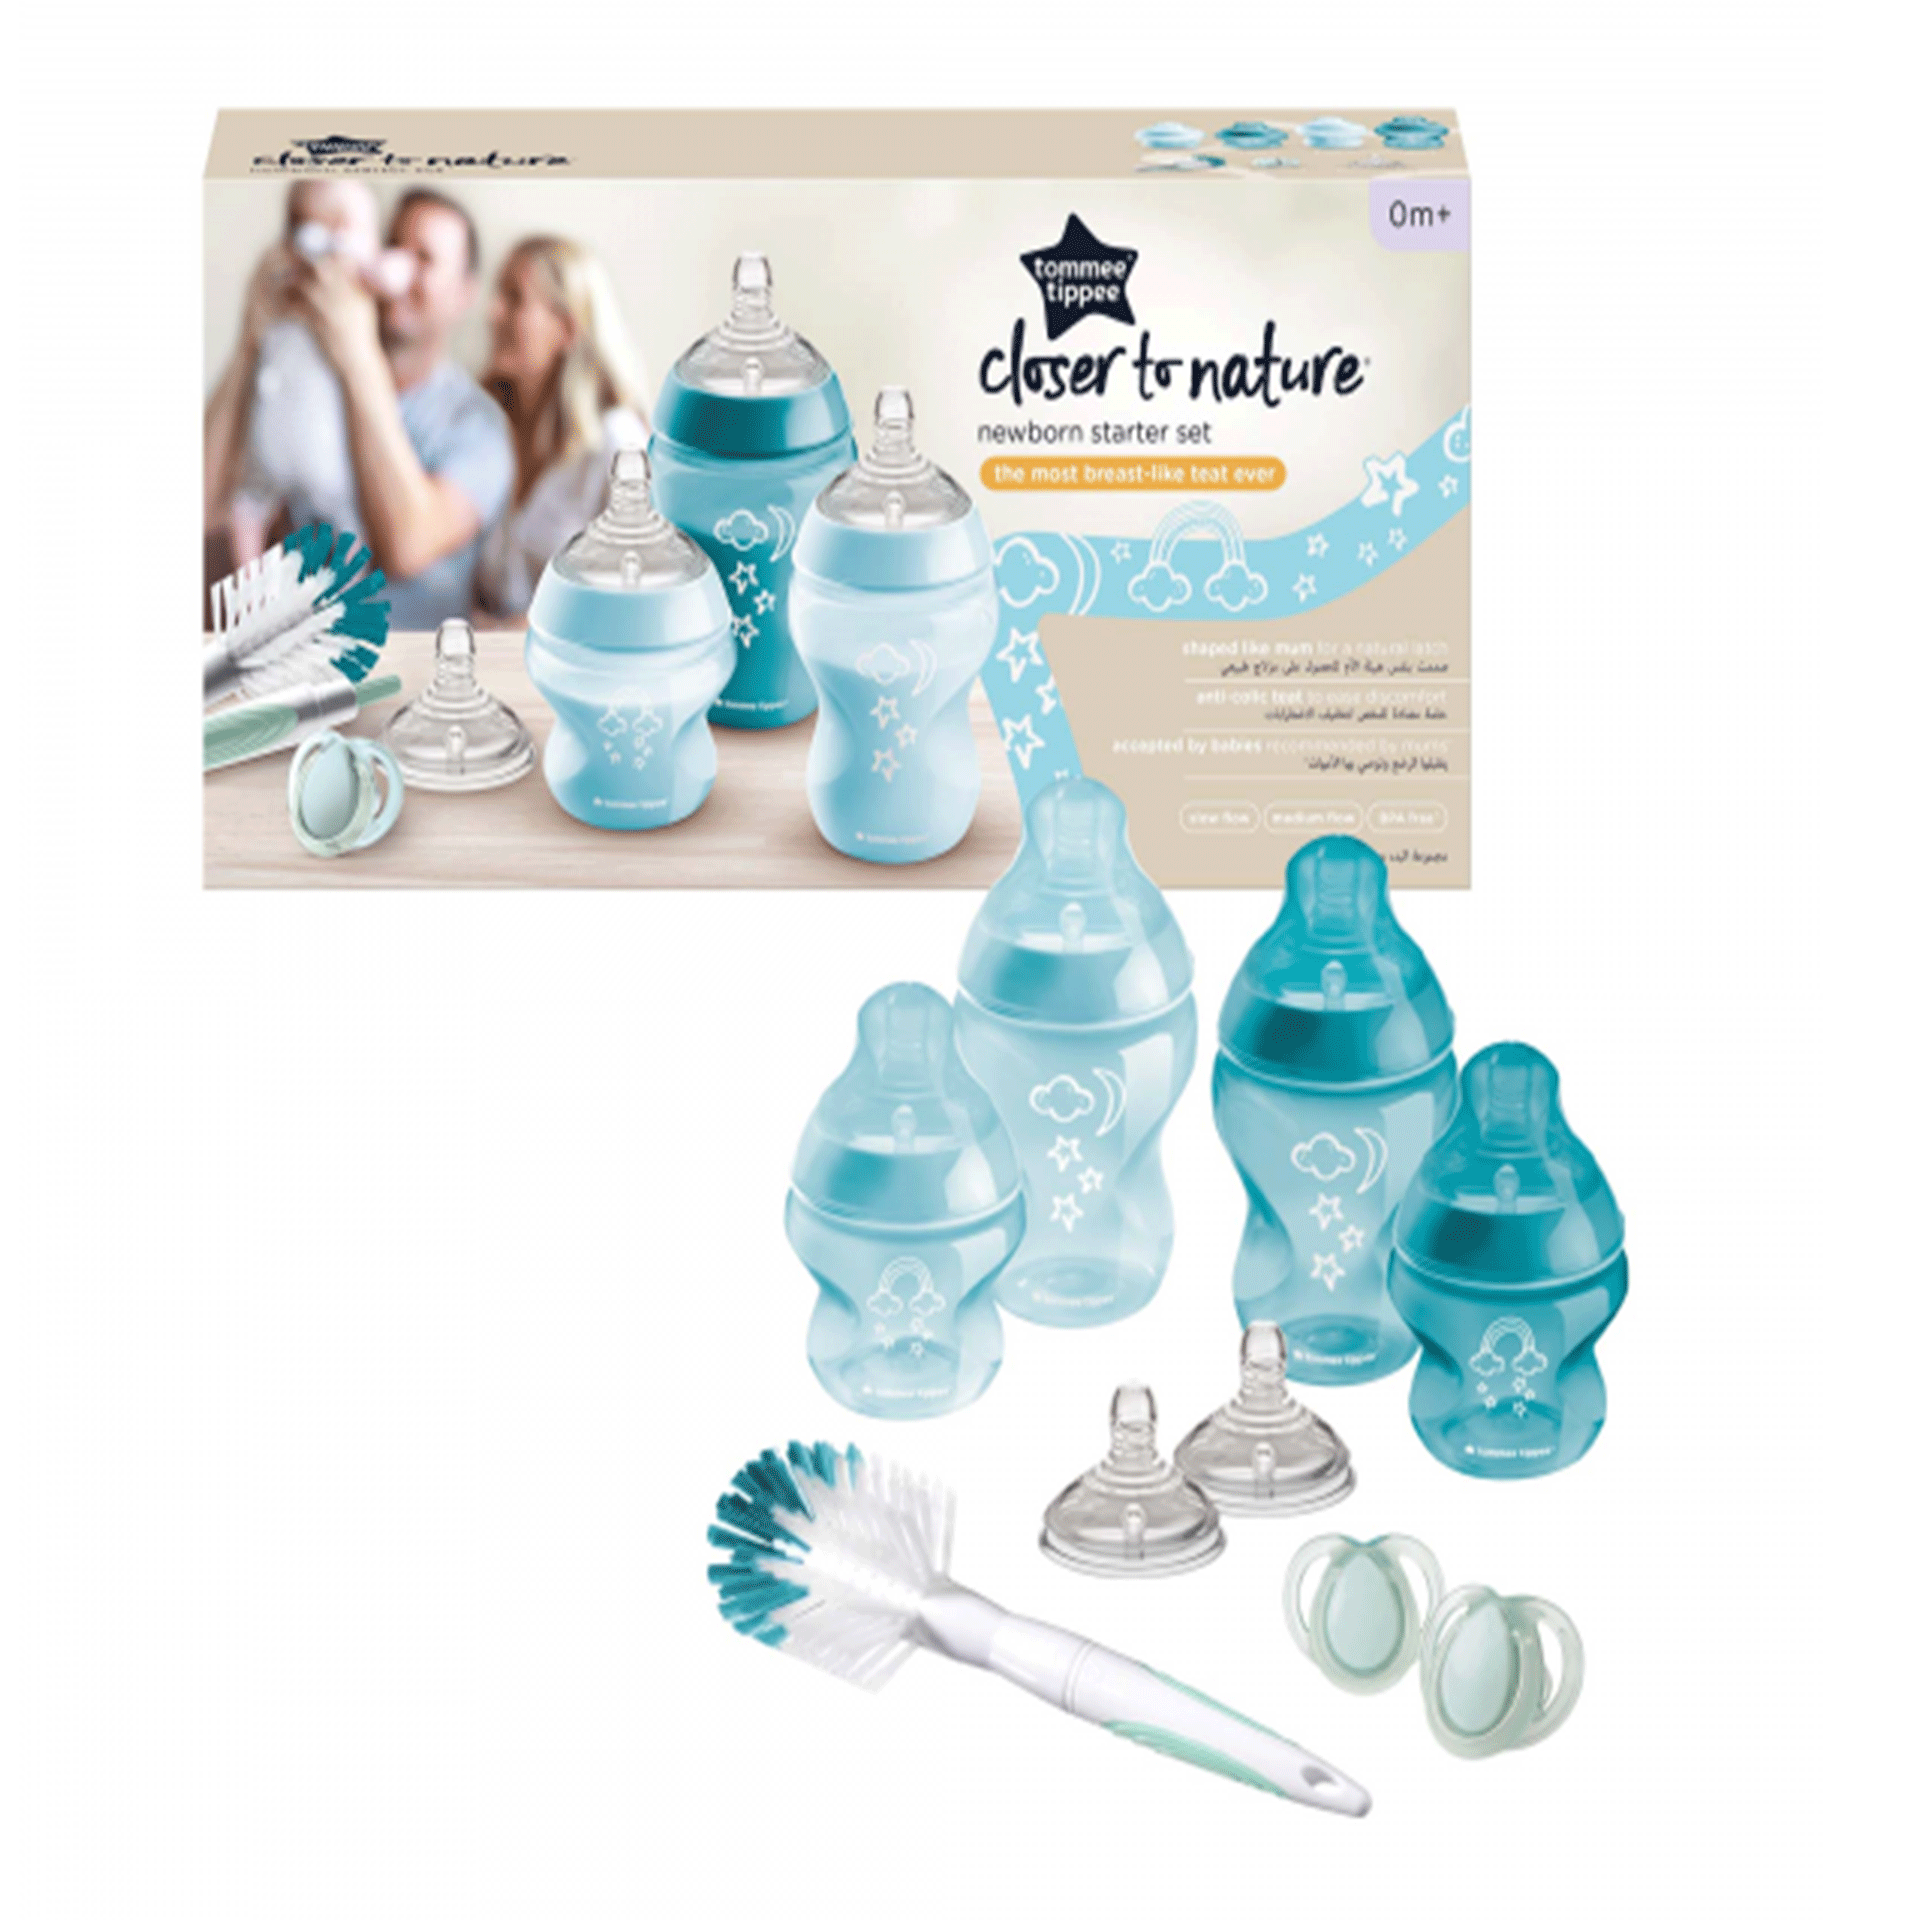 TOMMEE TIPPEE Kit de Nascimento Closer to Nature